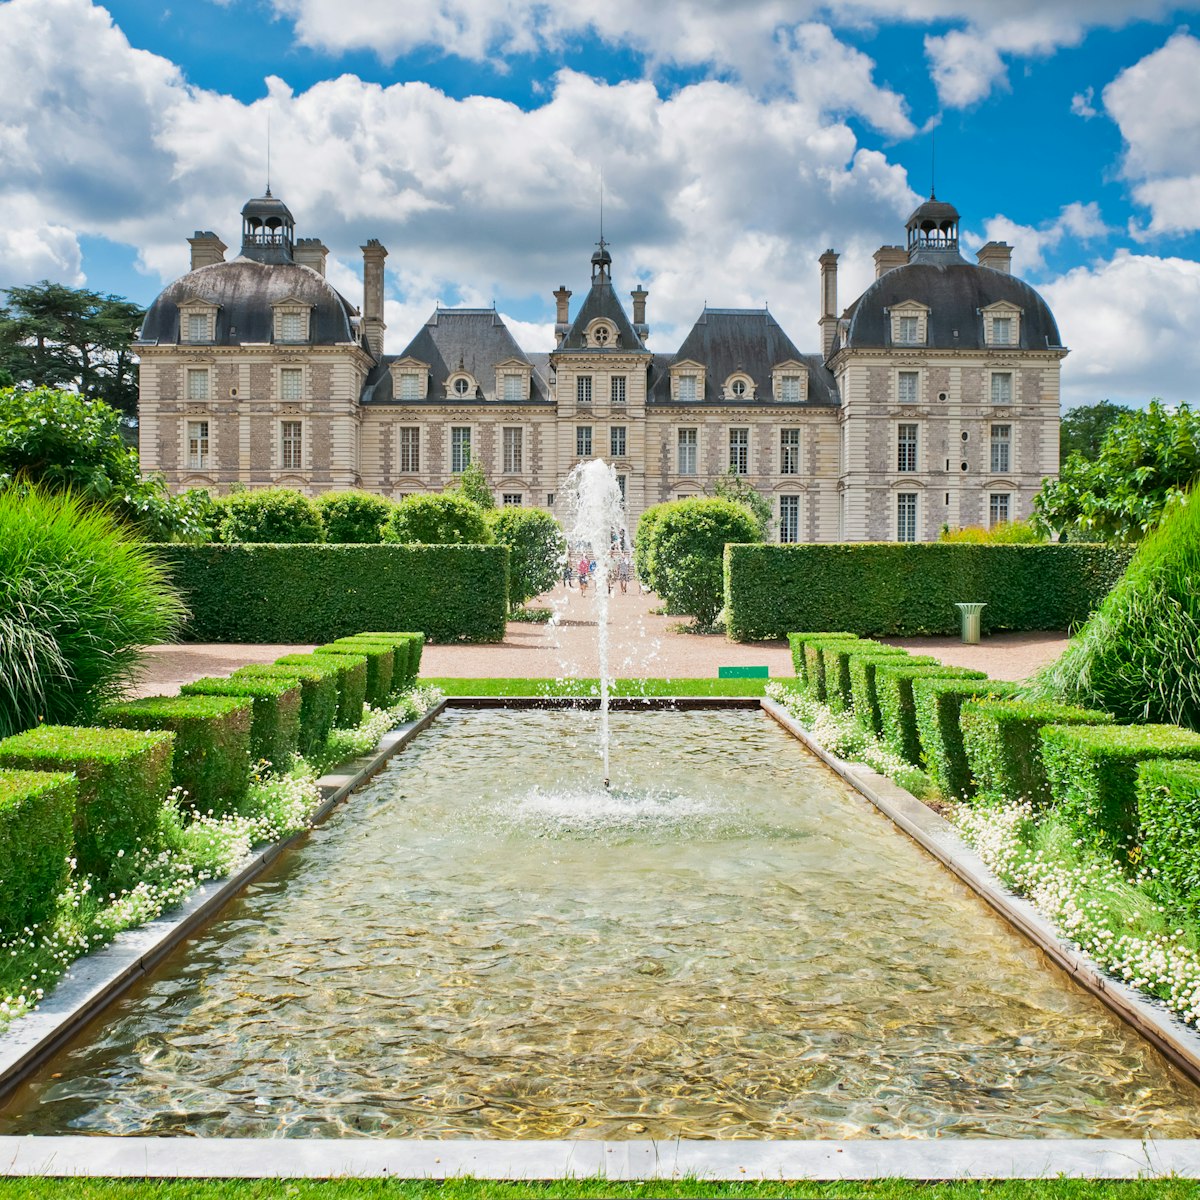 View of Cheverny Chateau from apprentice's garden.